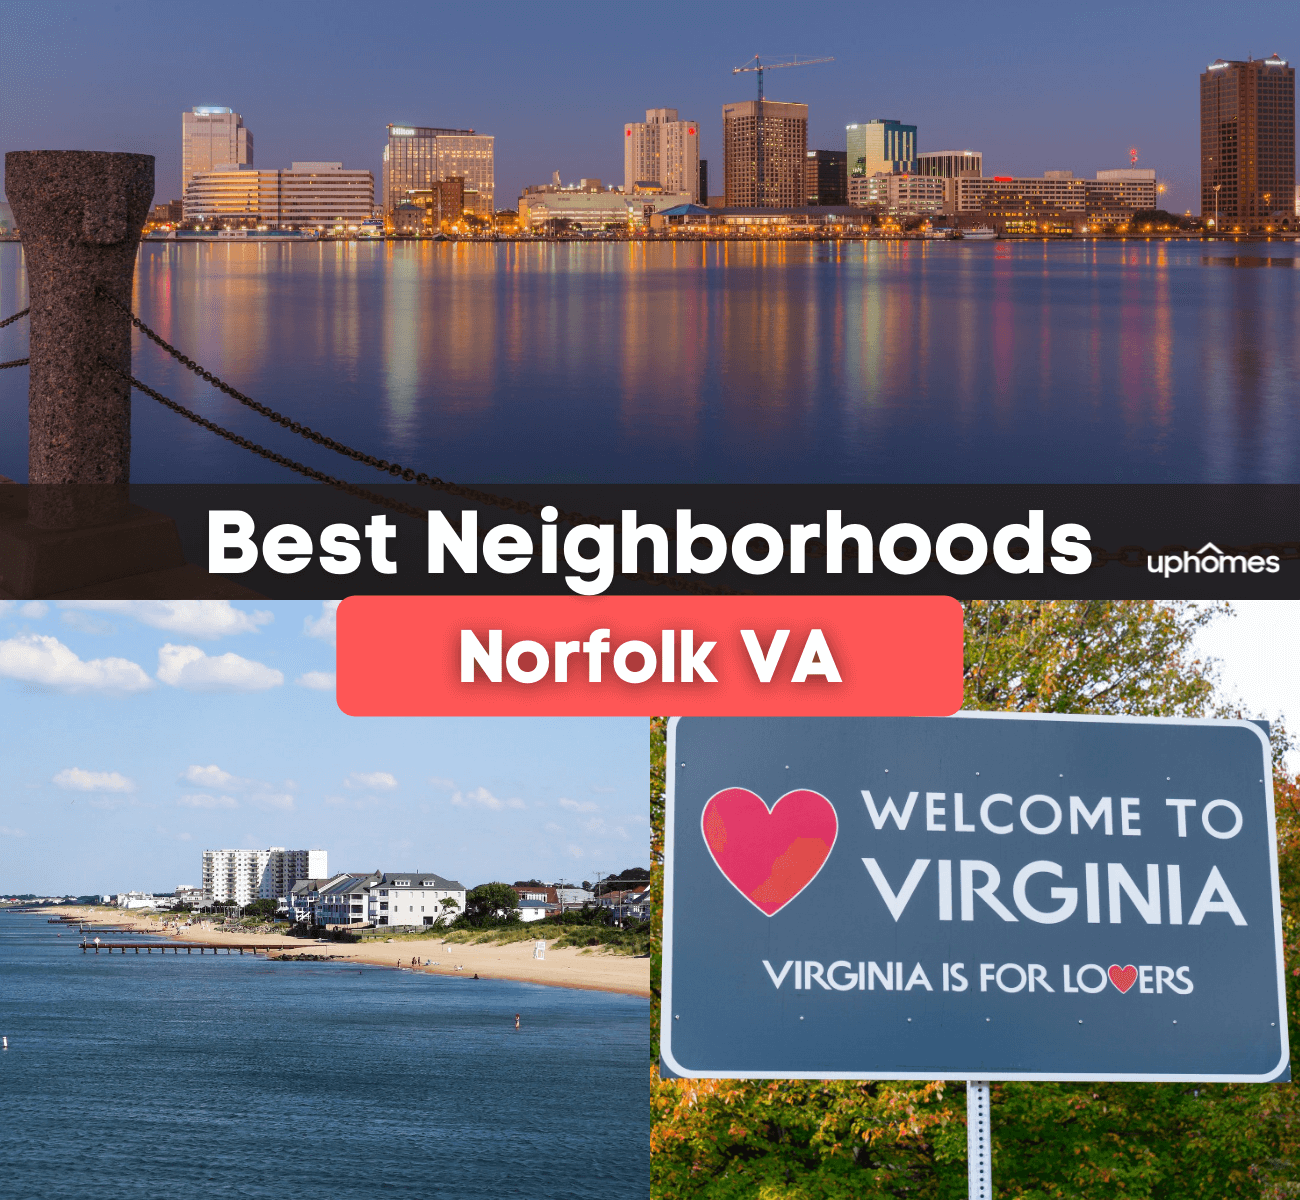 Best Neighborhoods in Norfolk VA - Where are the best places to live in Norfolk VA?